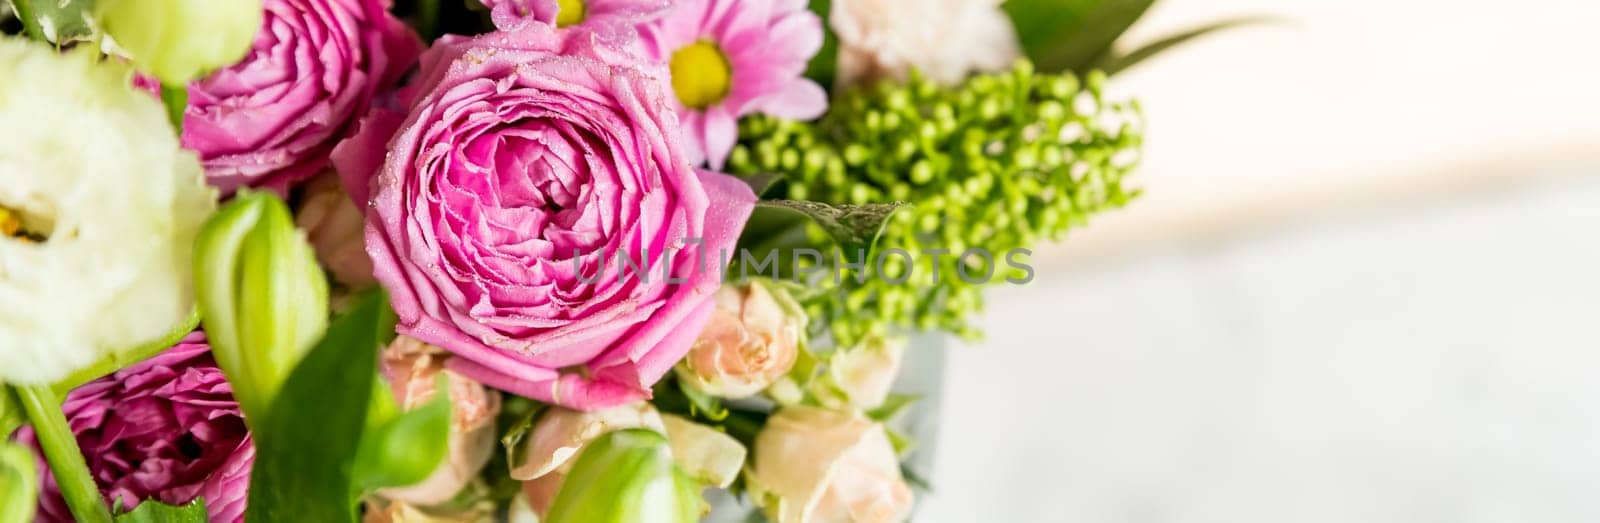 two bouquets of roses, daisies, lisianthus, chrysanthemums, unopened buds on a plank table and a background of pink silk fabric with pleats.